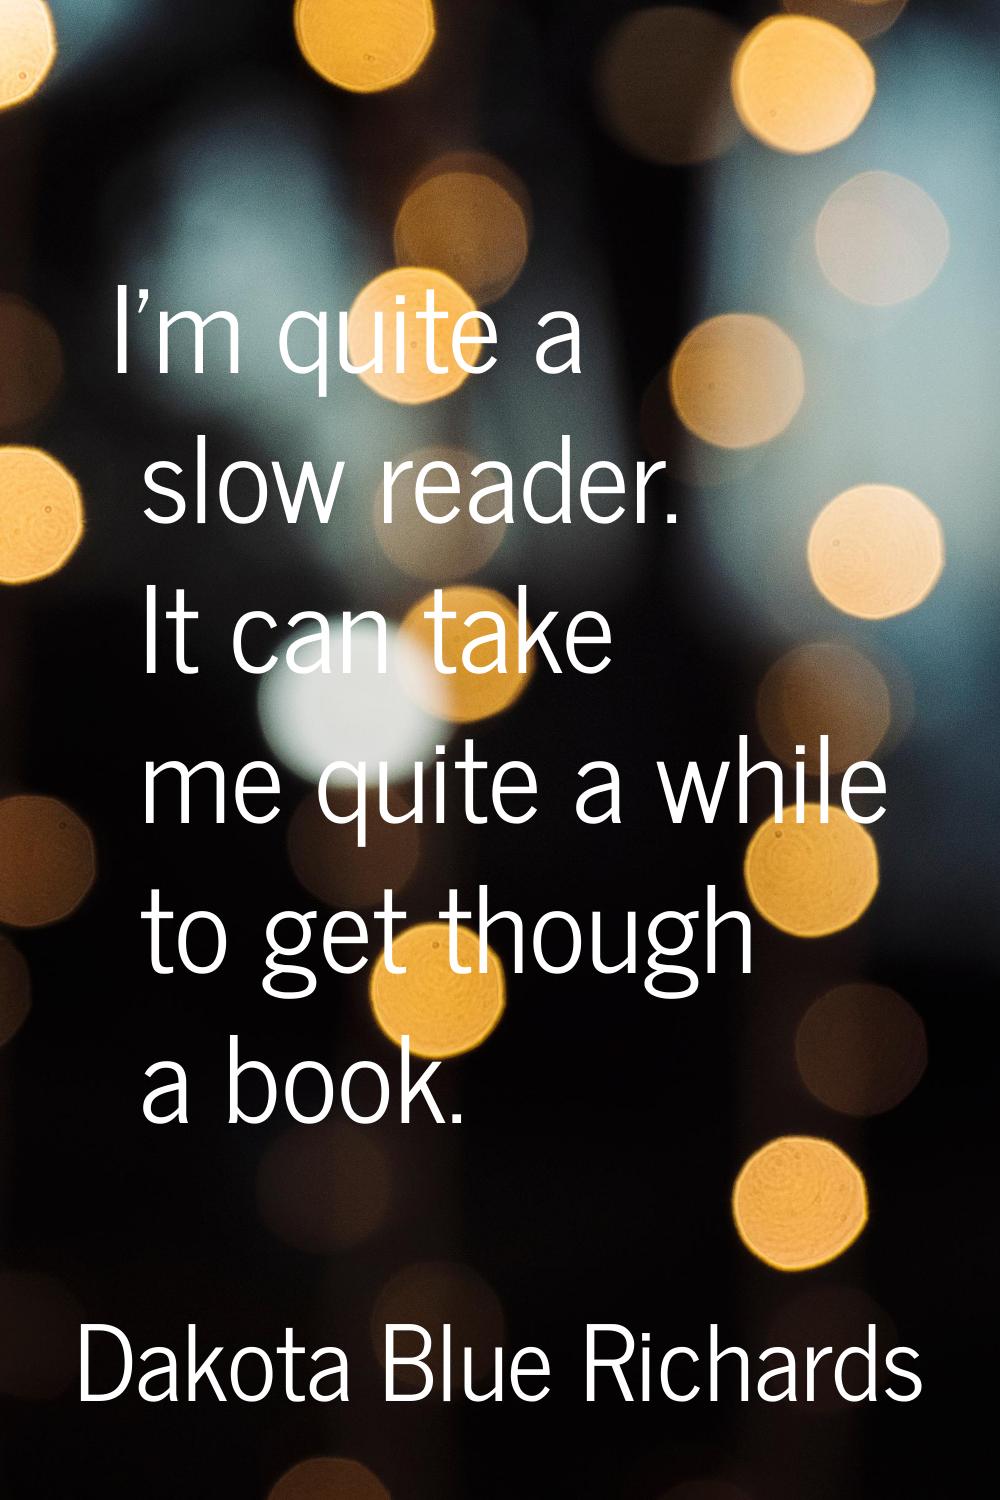 I'm quite a slow reader. It can take me quite a while to get though a book.